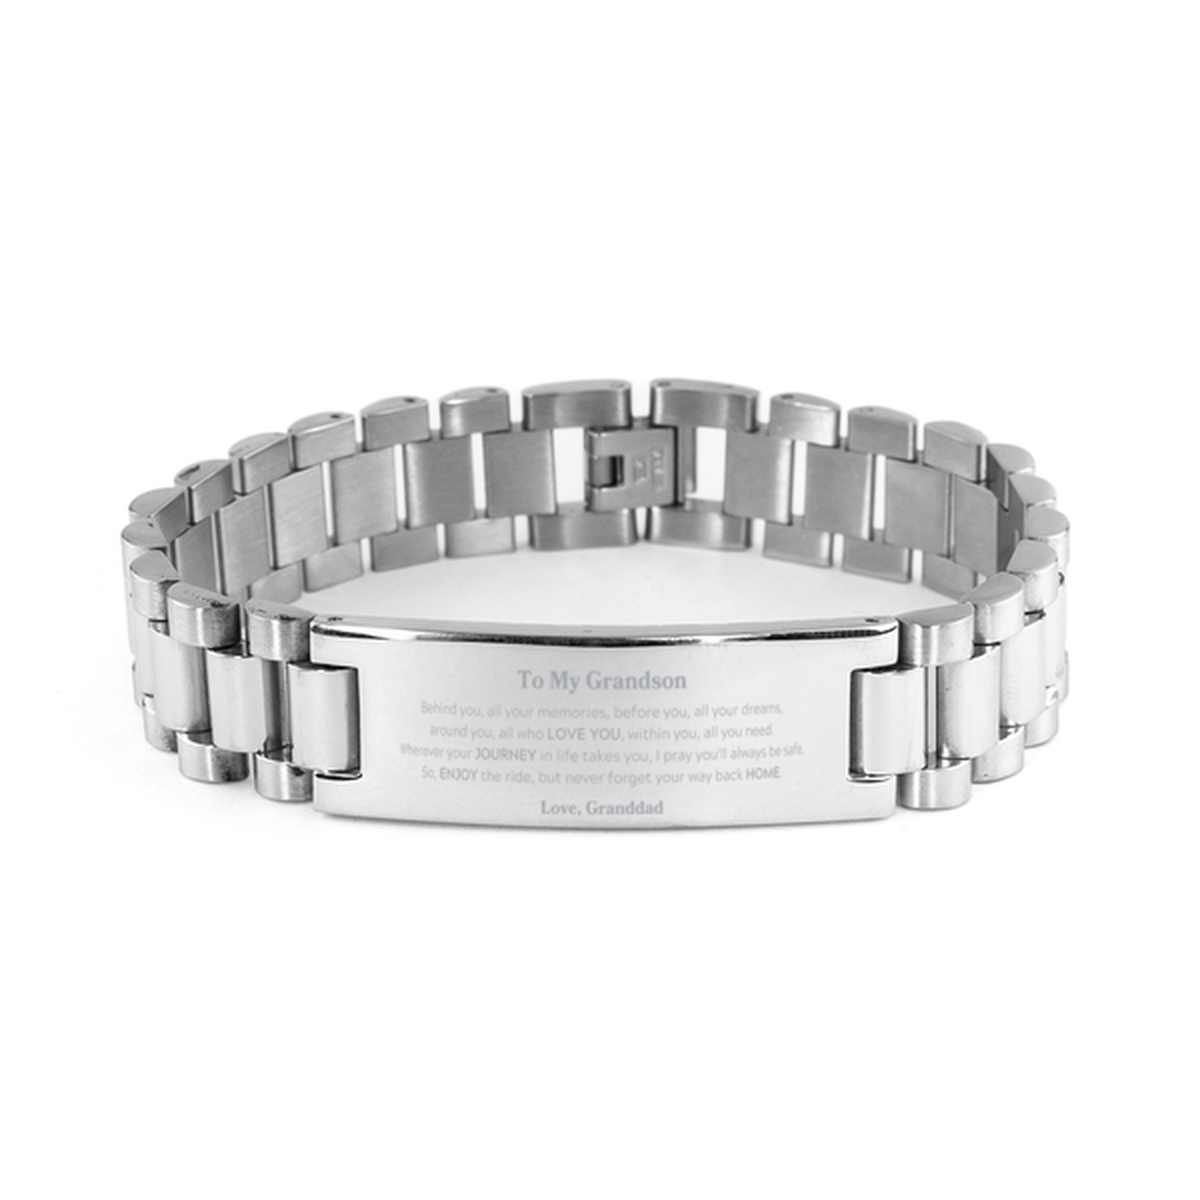 To My Grandson Graduation Gifts from Granddad, Grandson Ladder Stainless Steel Bracelet Christmas Birthday Gifts for Grandson Behind you, all your memories, before you, all your dreams. Love, Granddad